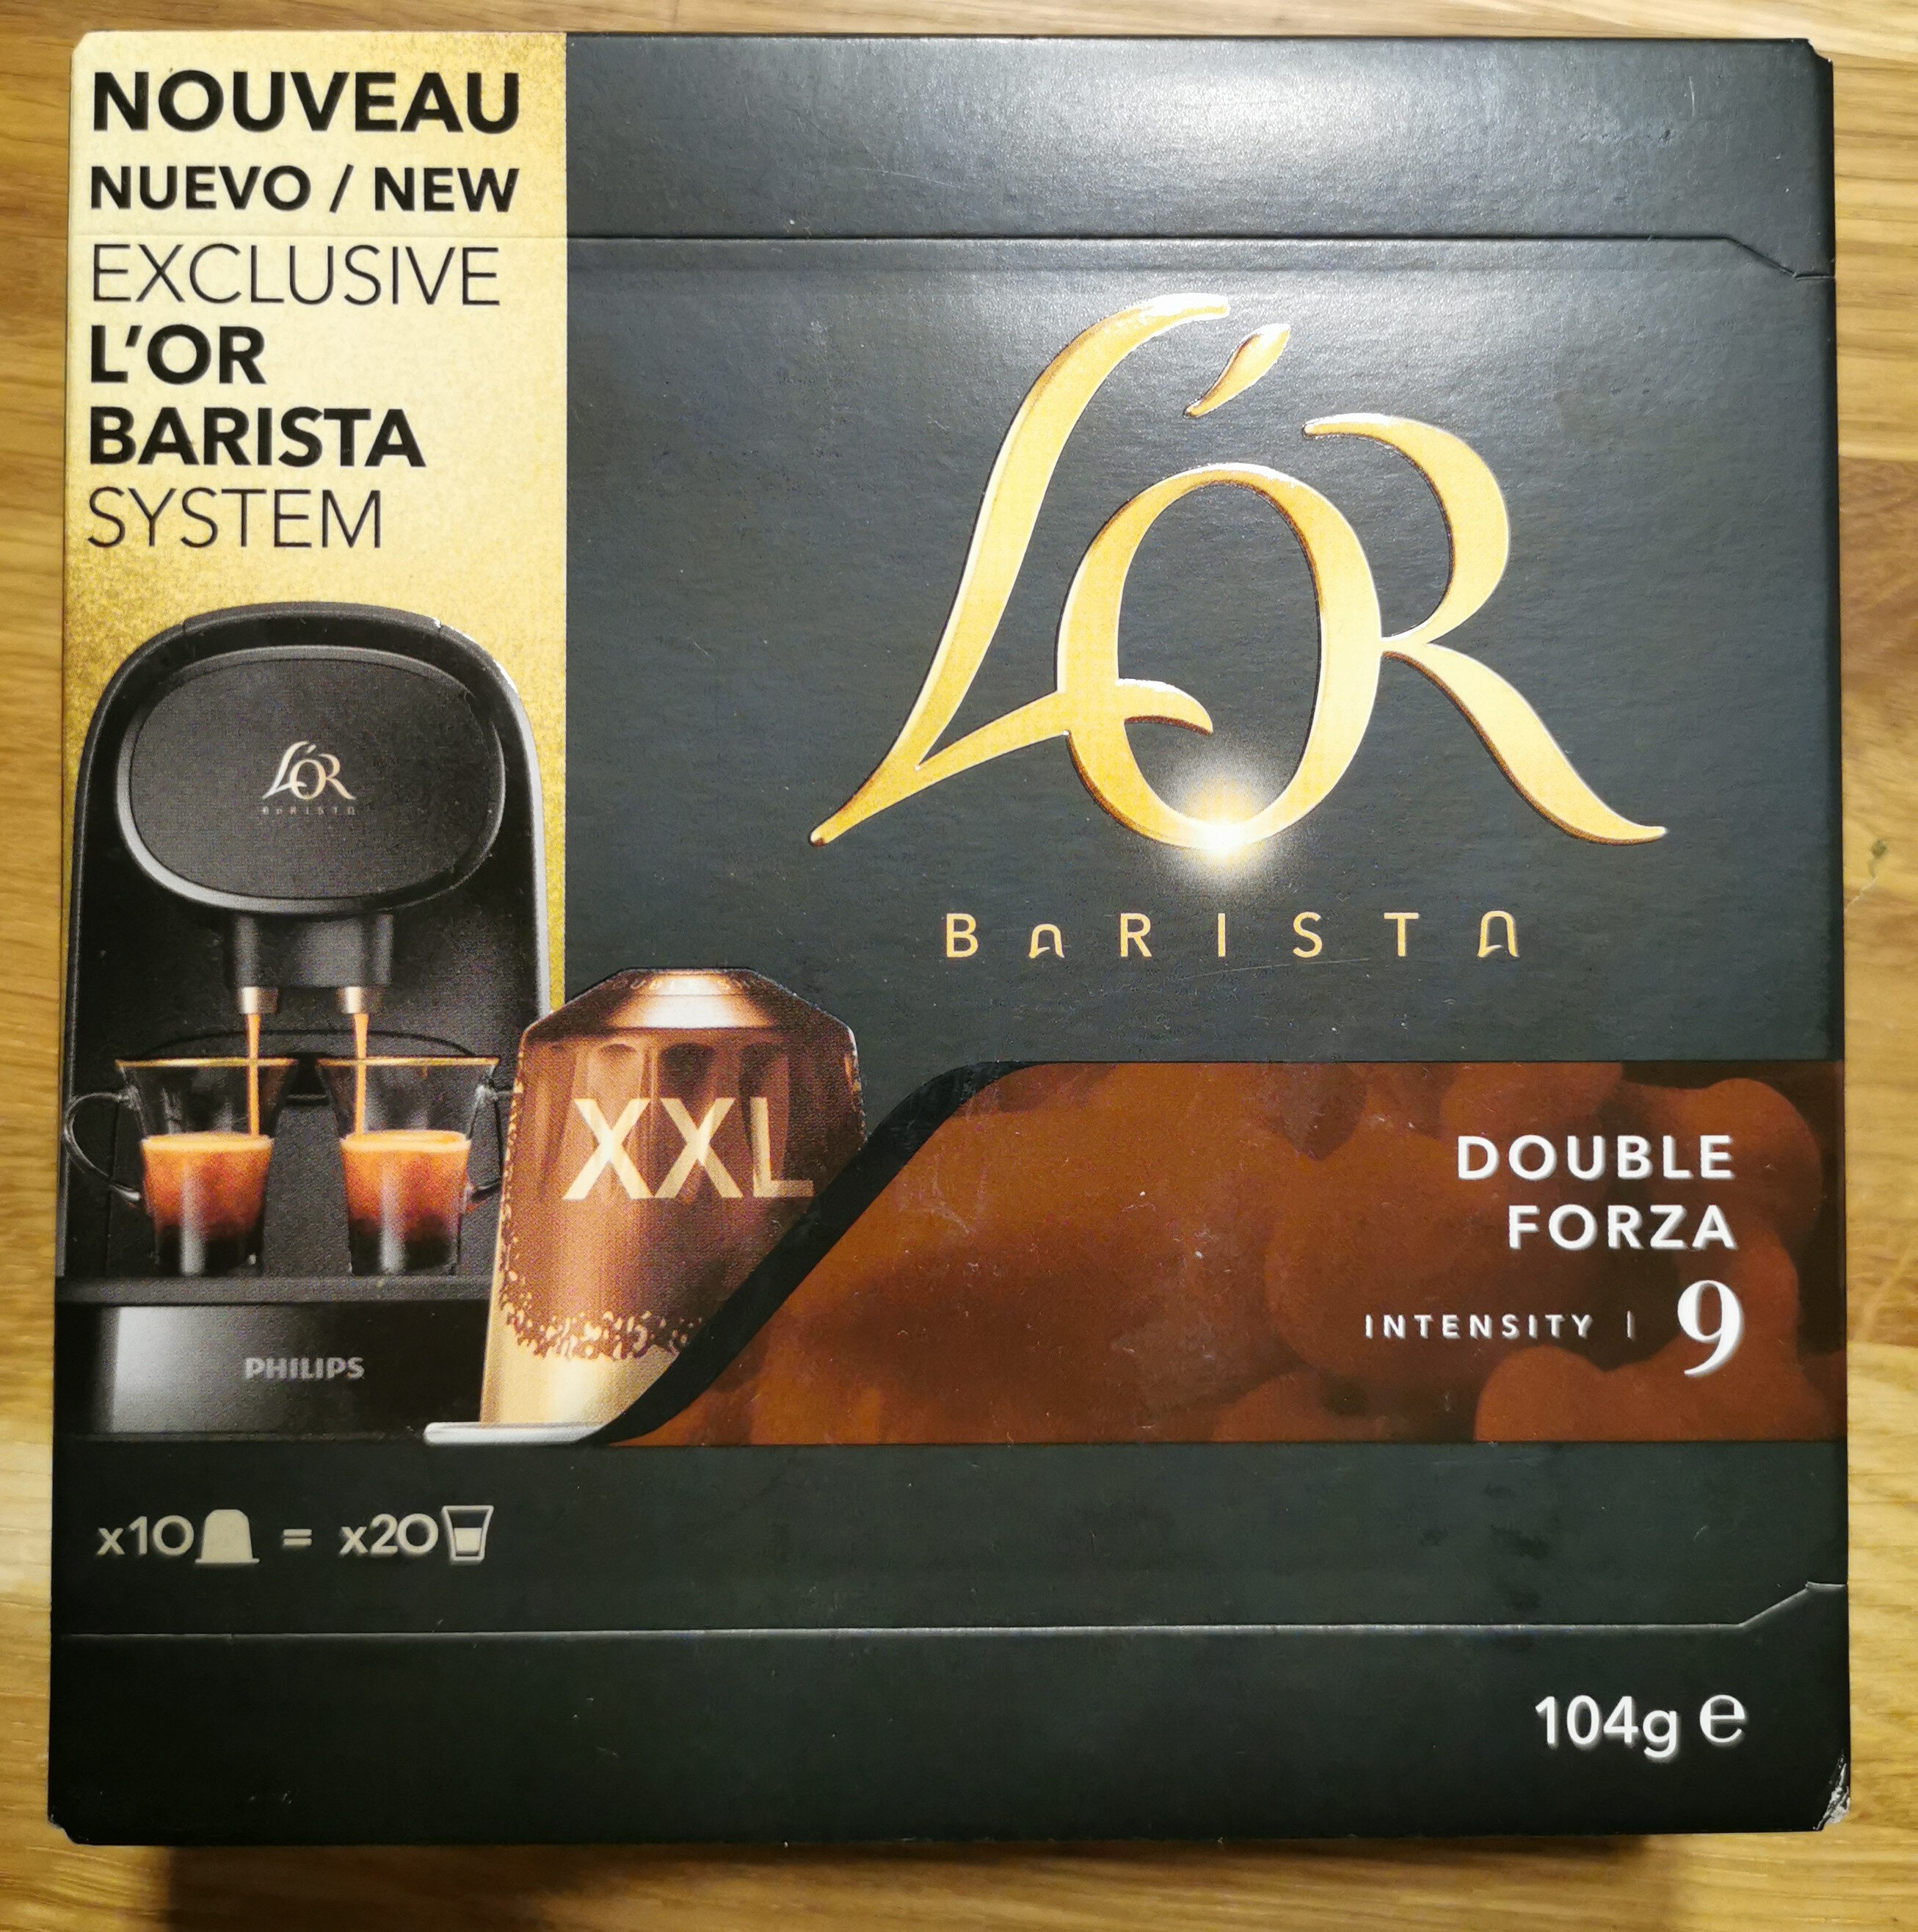 L'or Barista Double Forza Intensity 9 - Product - de